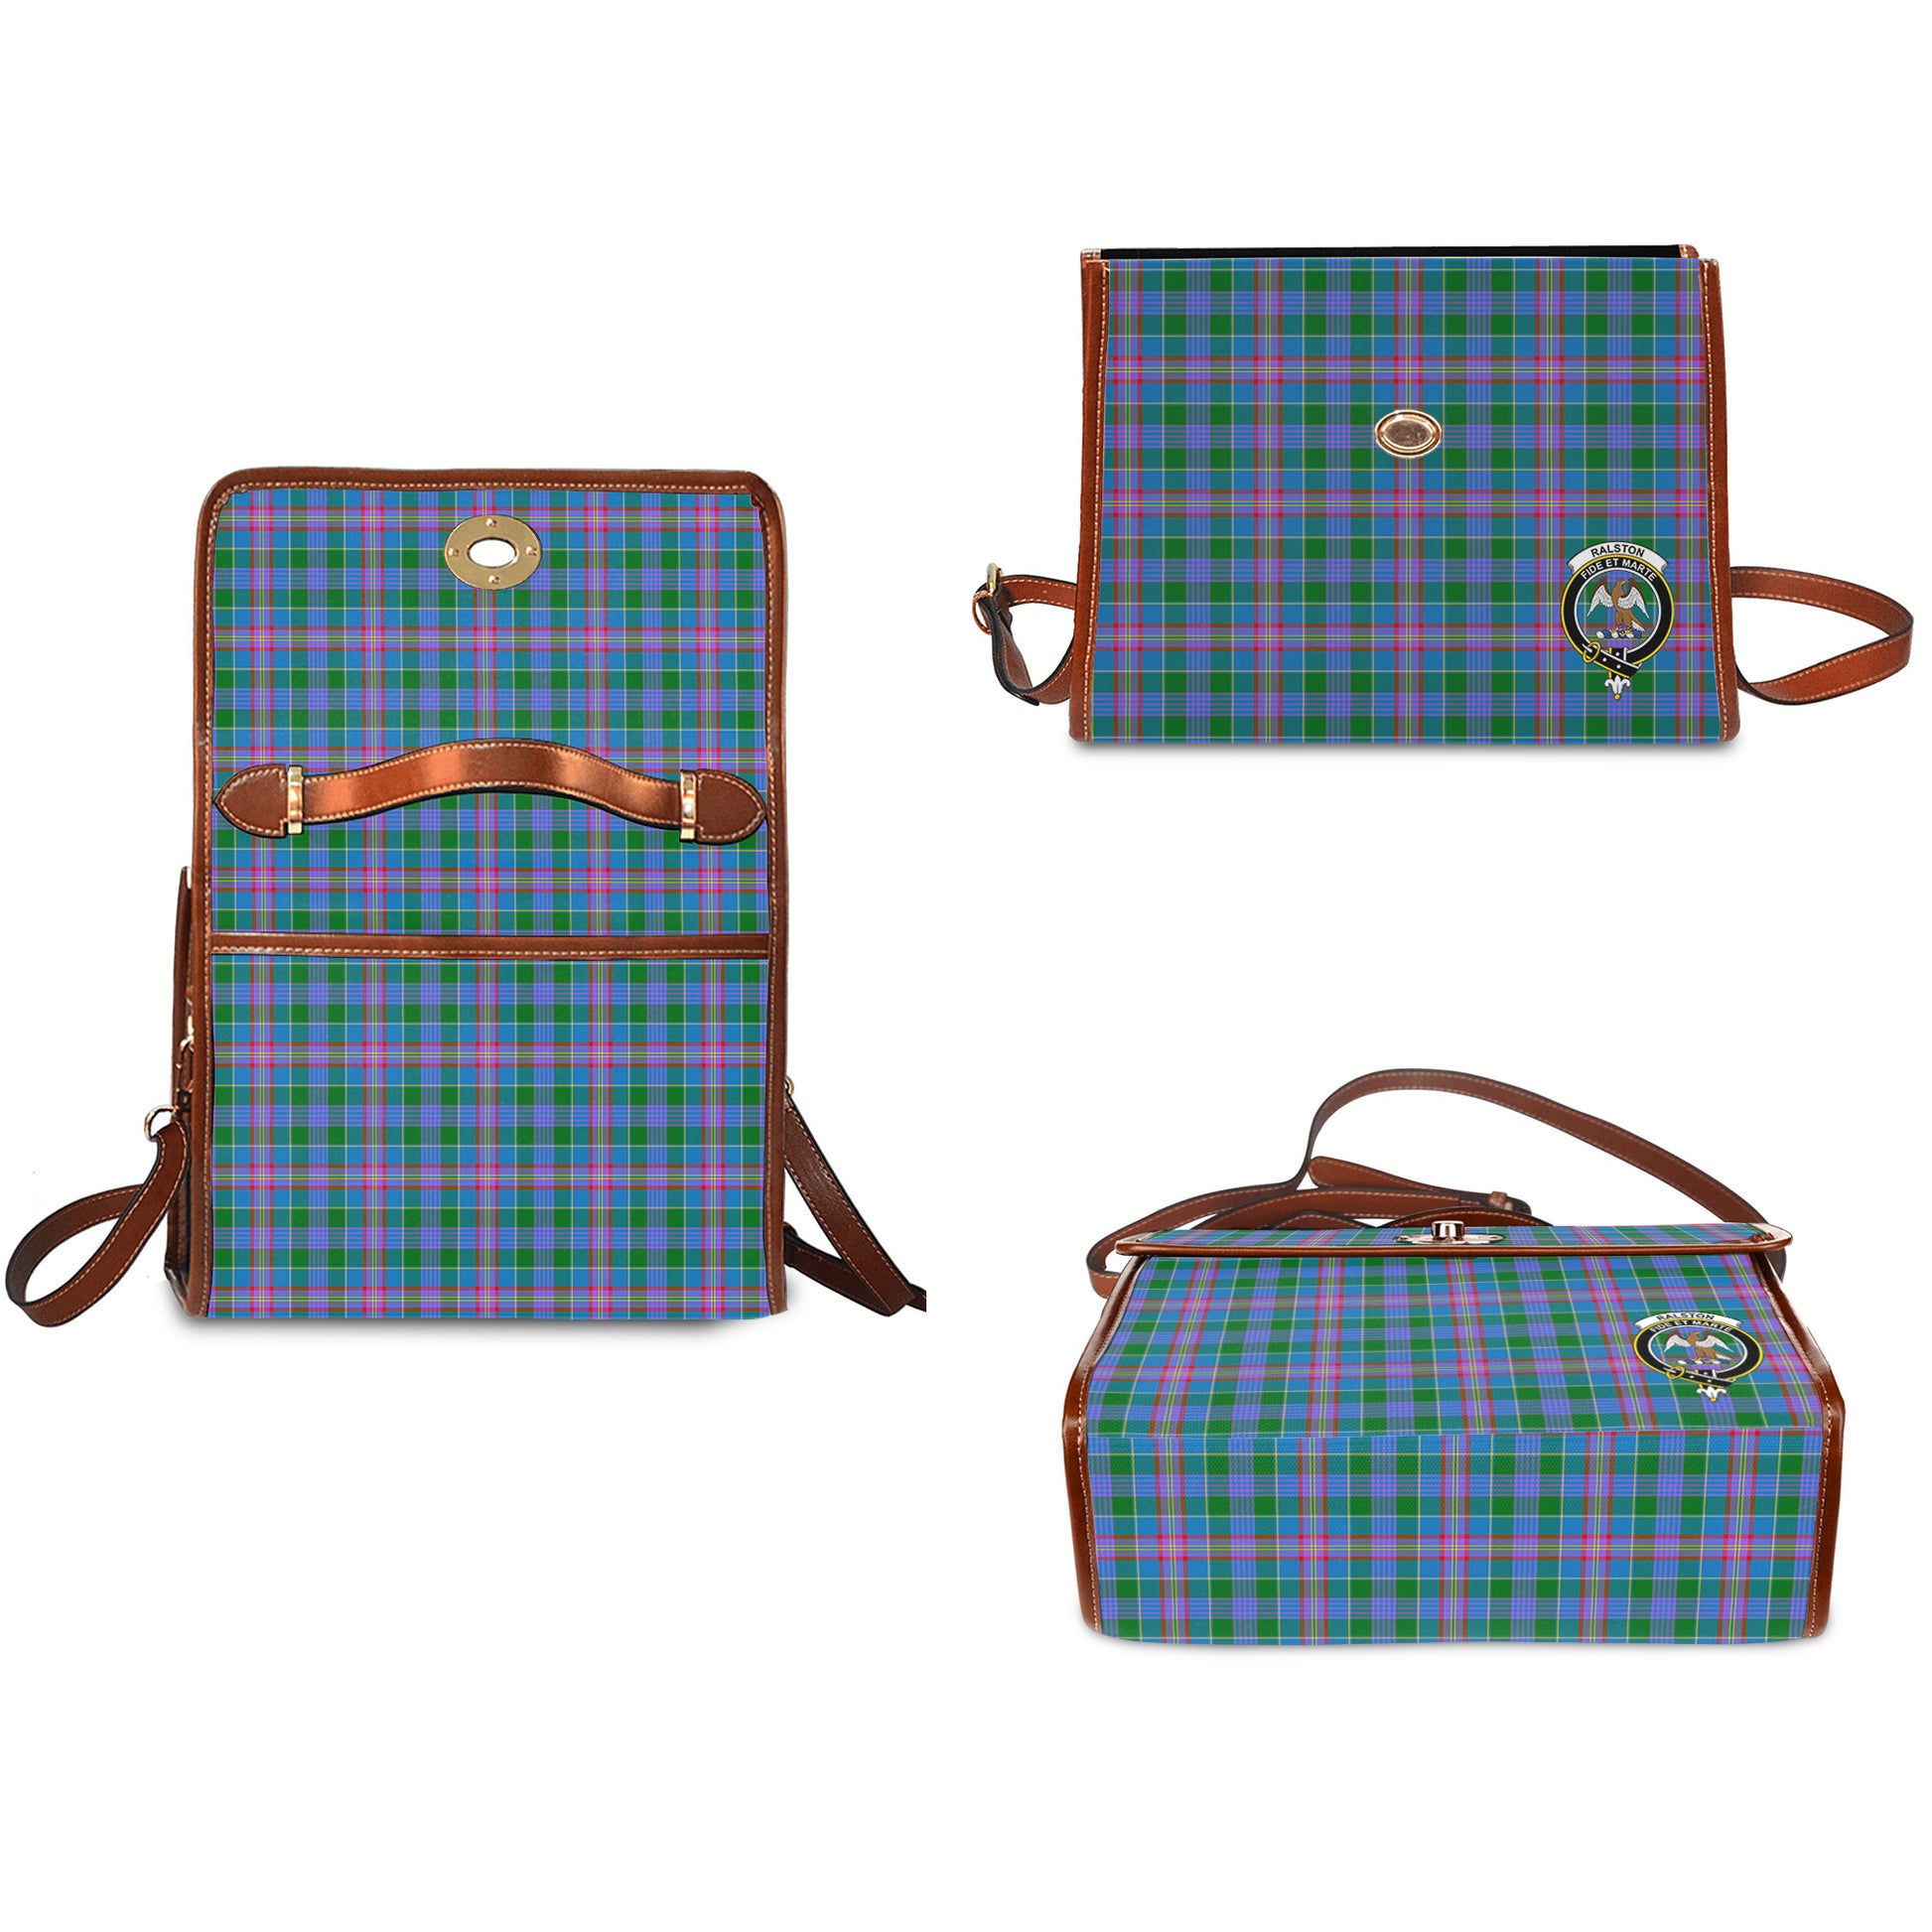 ralston-tartan-leather-strap-waterproof-canvas-bag-with-family-crest